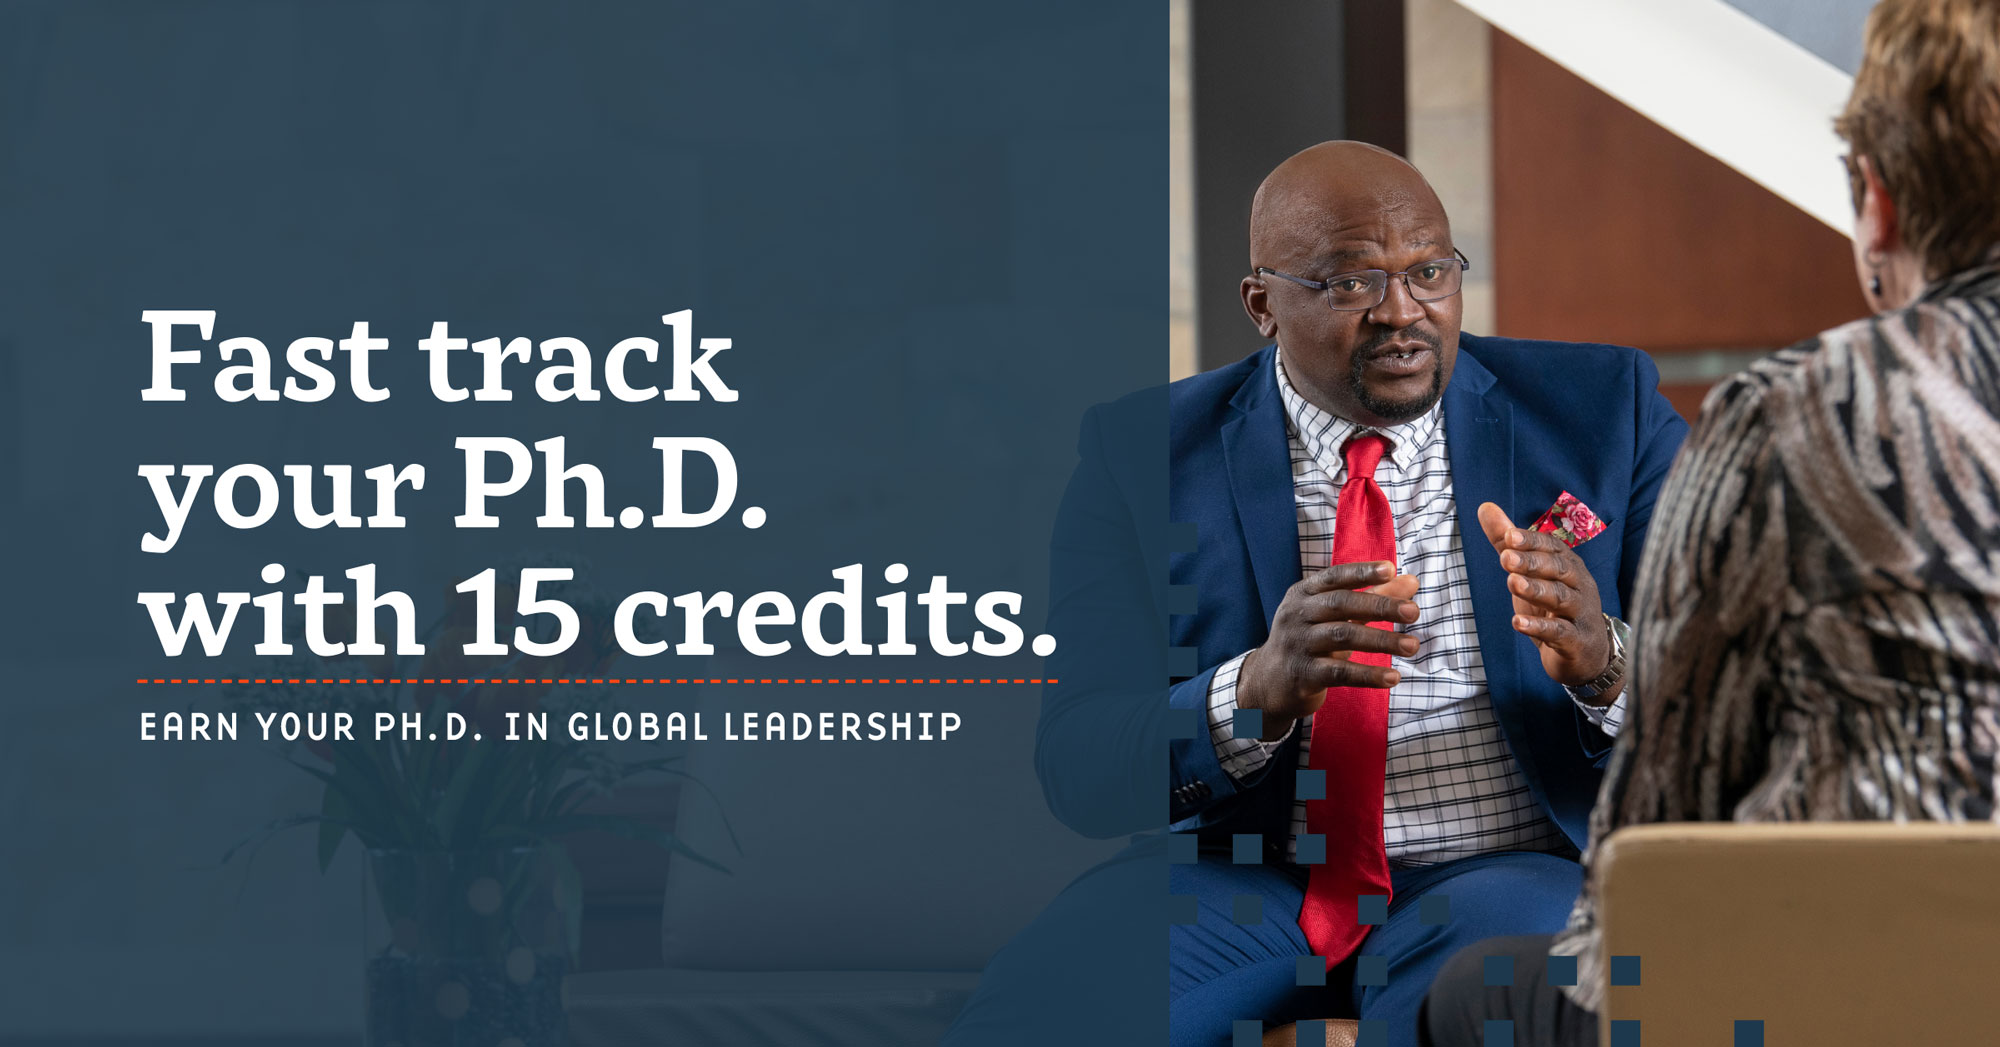 Fast track your Ph.D. with 15 credits.